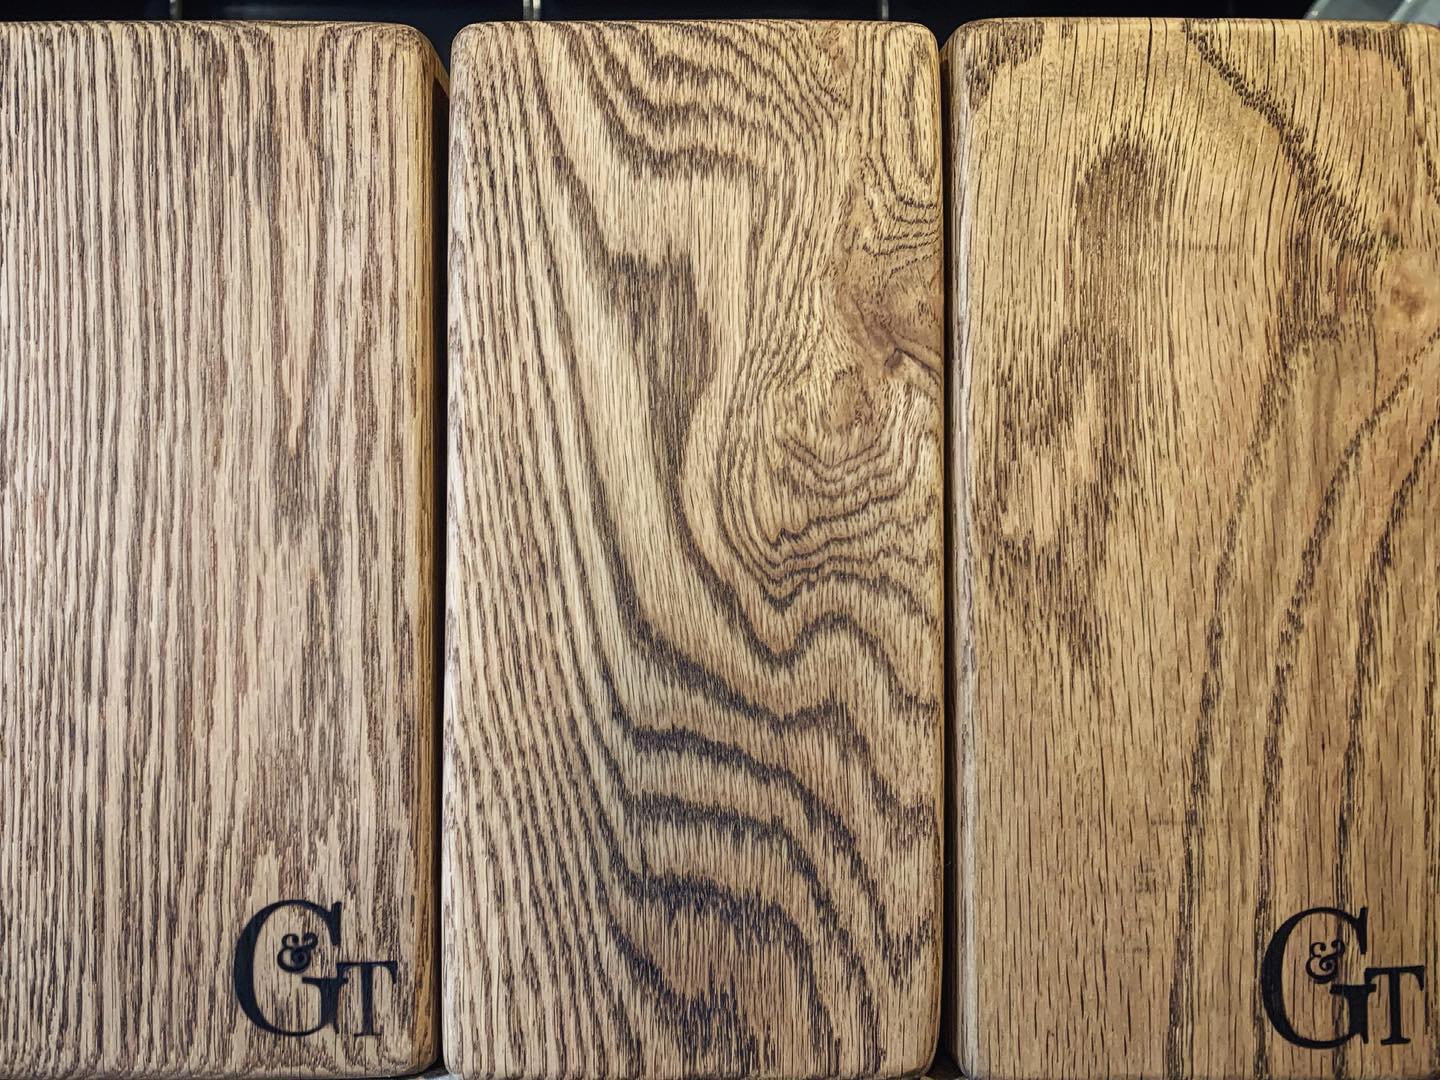 Some gorgeous lumps of oak being transformed into doorstops 🫶 we’ll have lots with us at our next market which is @clevedonsundaymarket on May the 7th! #shophandmade #shoplocal #clevedon #oak #handcraftedhomewares #gingerandtweed